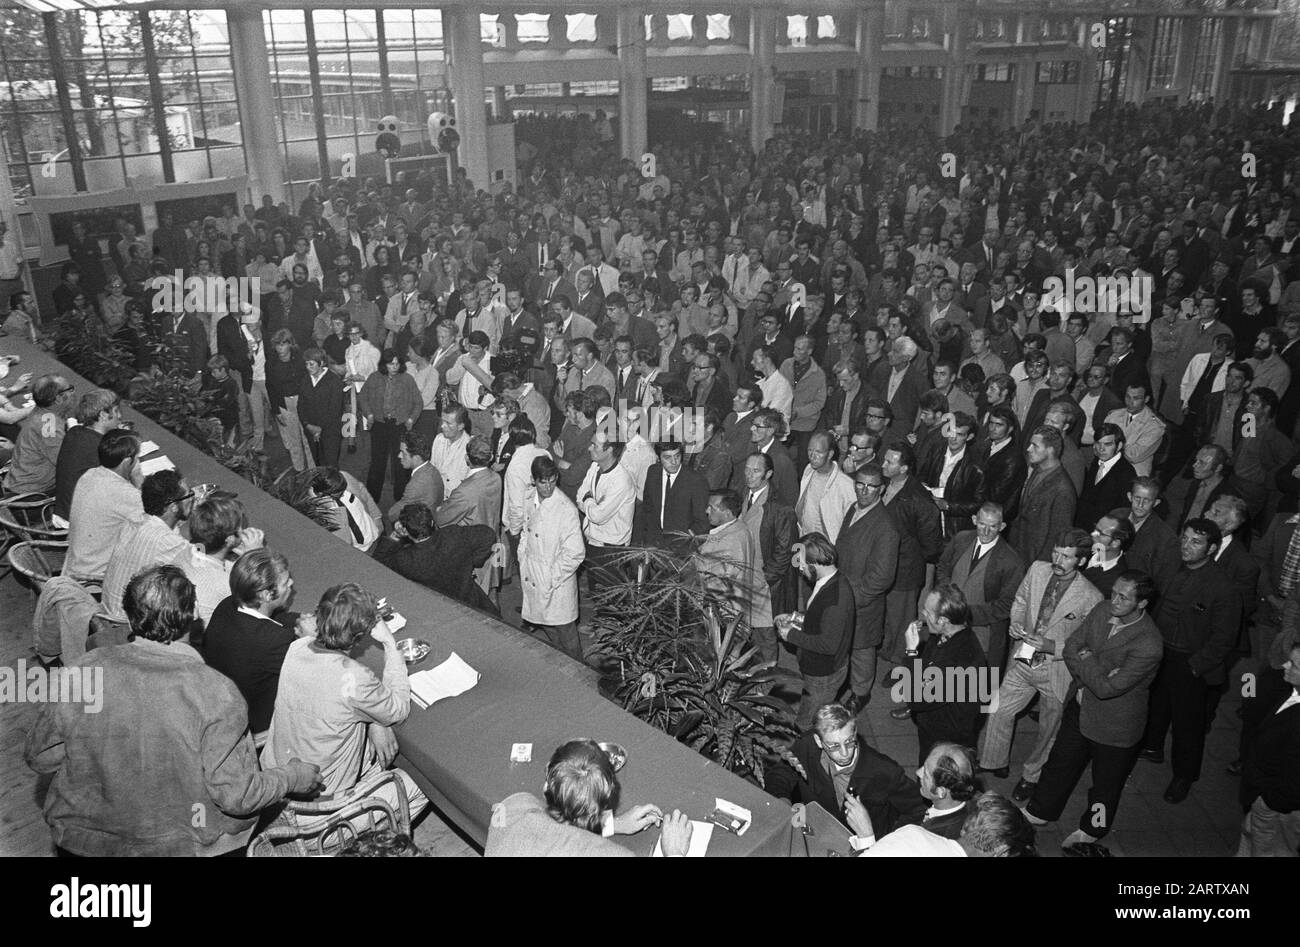 Decoderen Uitwisseling Verborgen Striking dock workers holding protest gathering in Rivierahal, Rotterdam  Date: 9 September 1970 Location: Rotterdam, Zuid-Holland Keywords:  HADWORKERS, Protest meetings Institution name: Riviera Hall Stock Photo -  Alamy